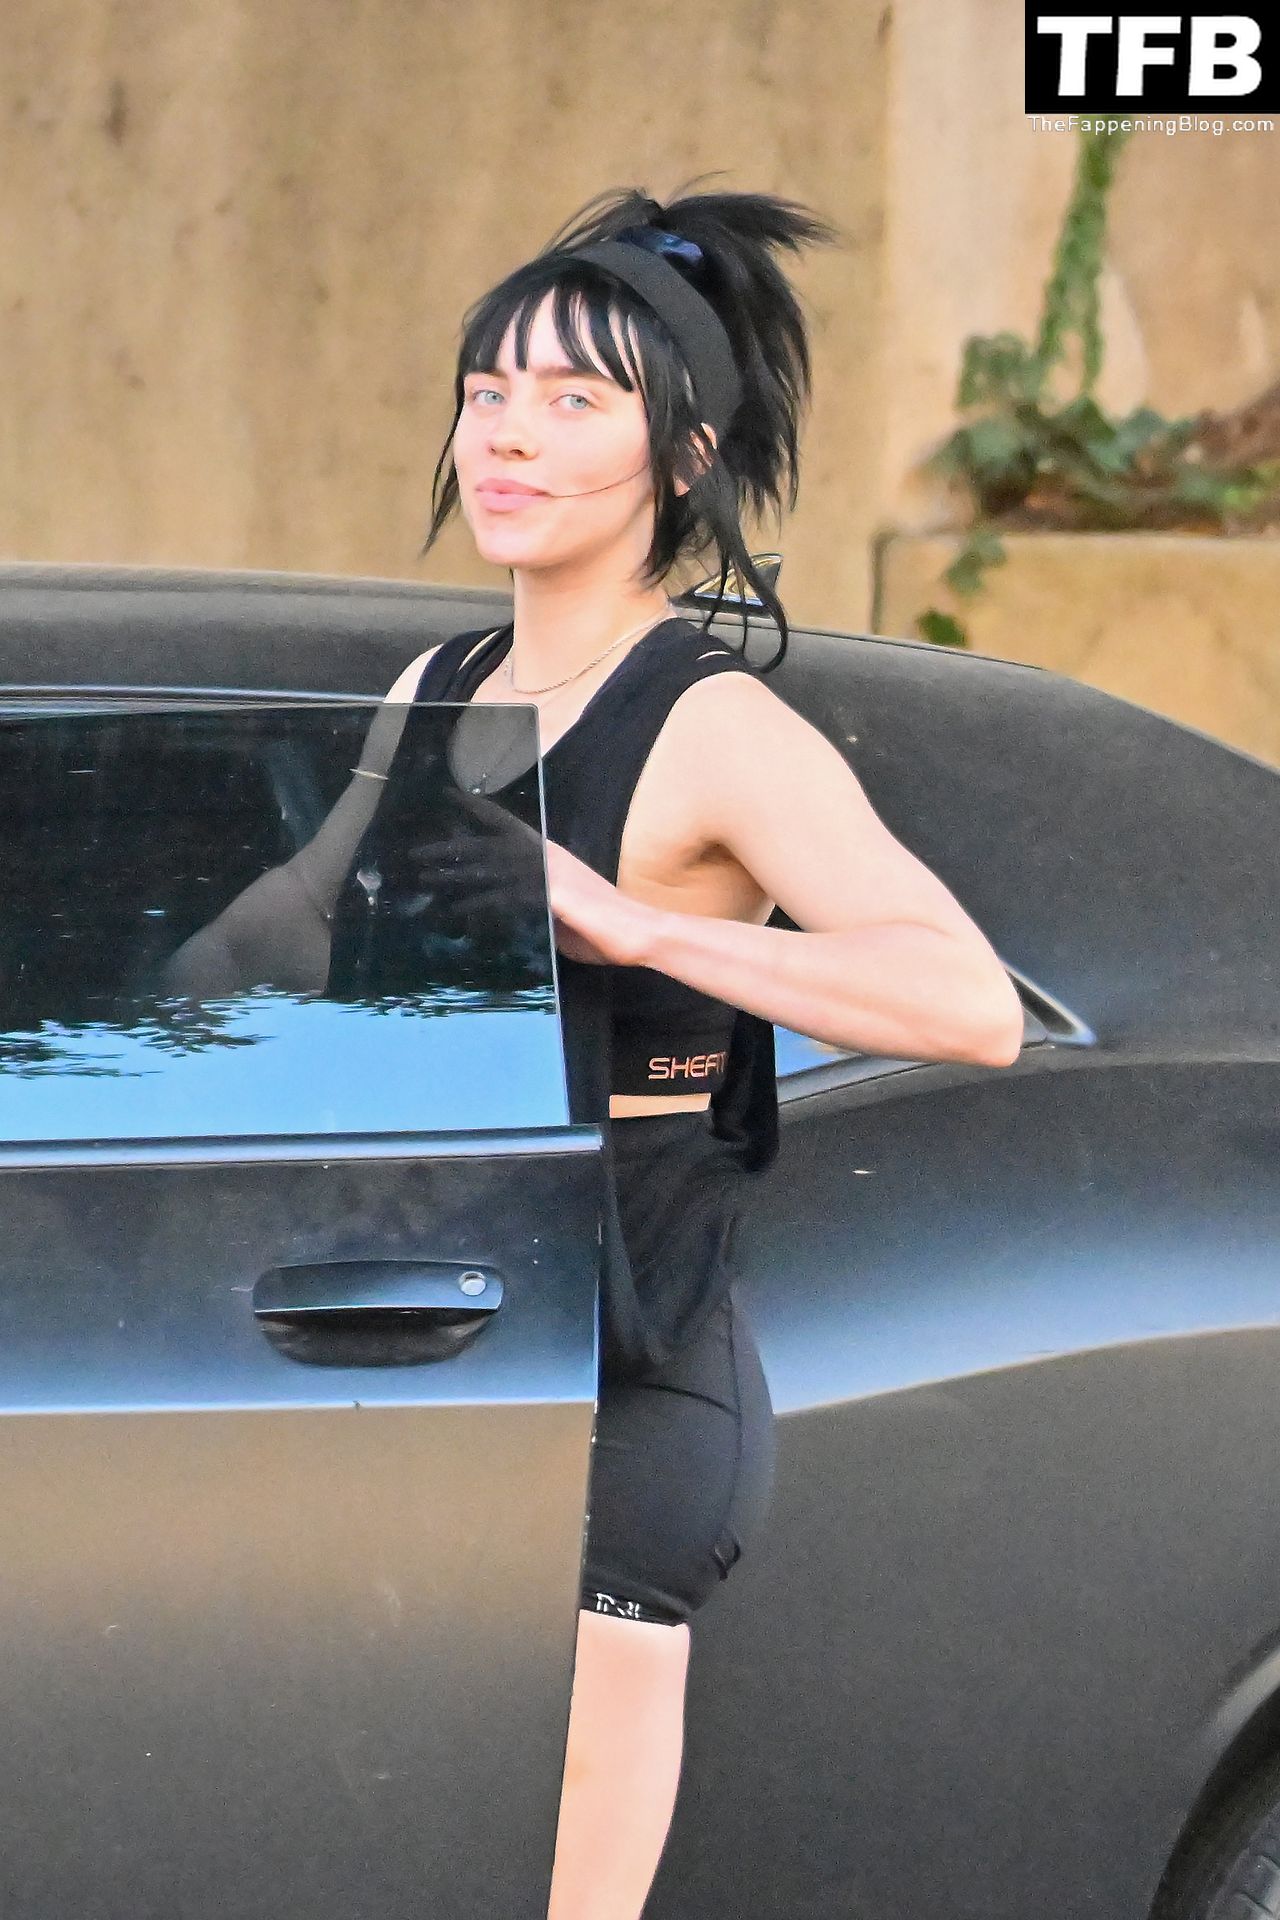 Billie Eilish Sexy The Fappening Blog 1 - Billie Eilish Keeps Up Her Fitness Regime, Stepping Out For Another Workout in Studio City (26 Photos)